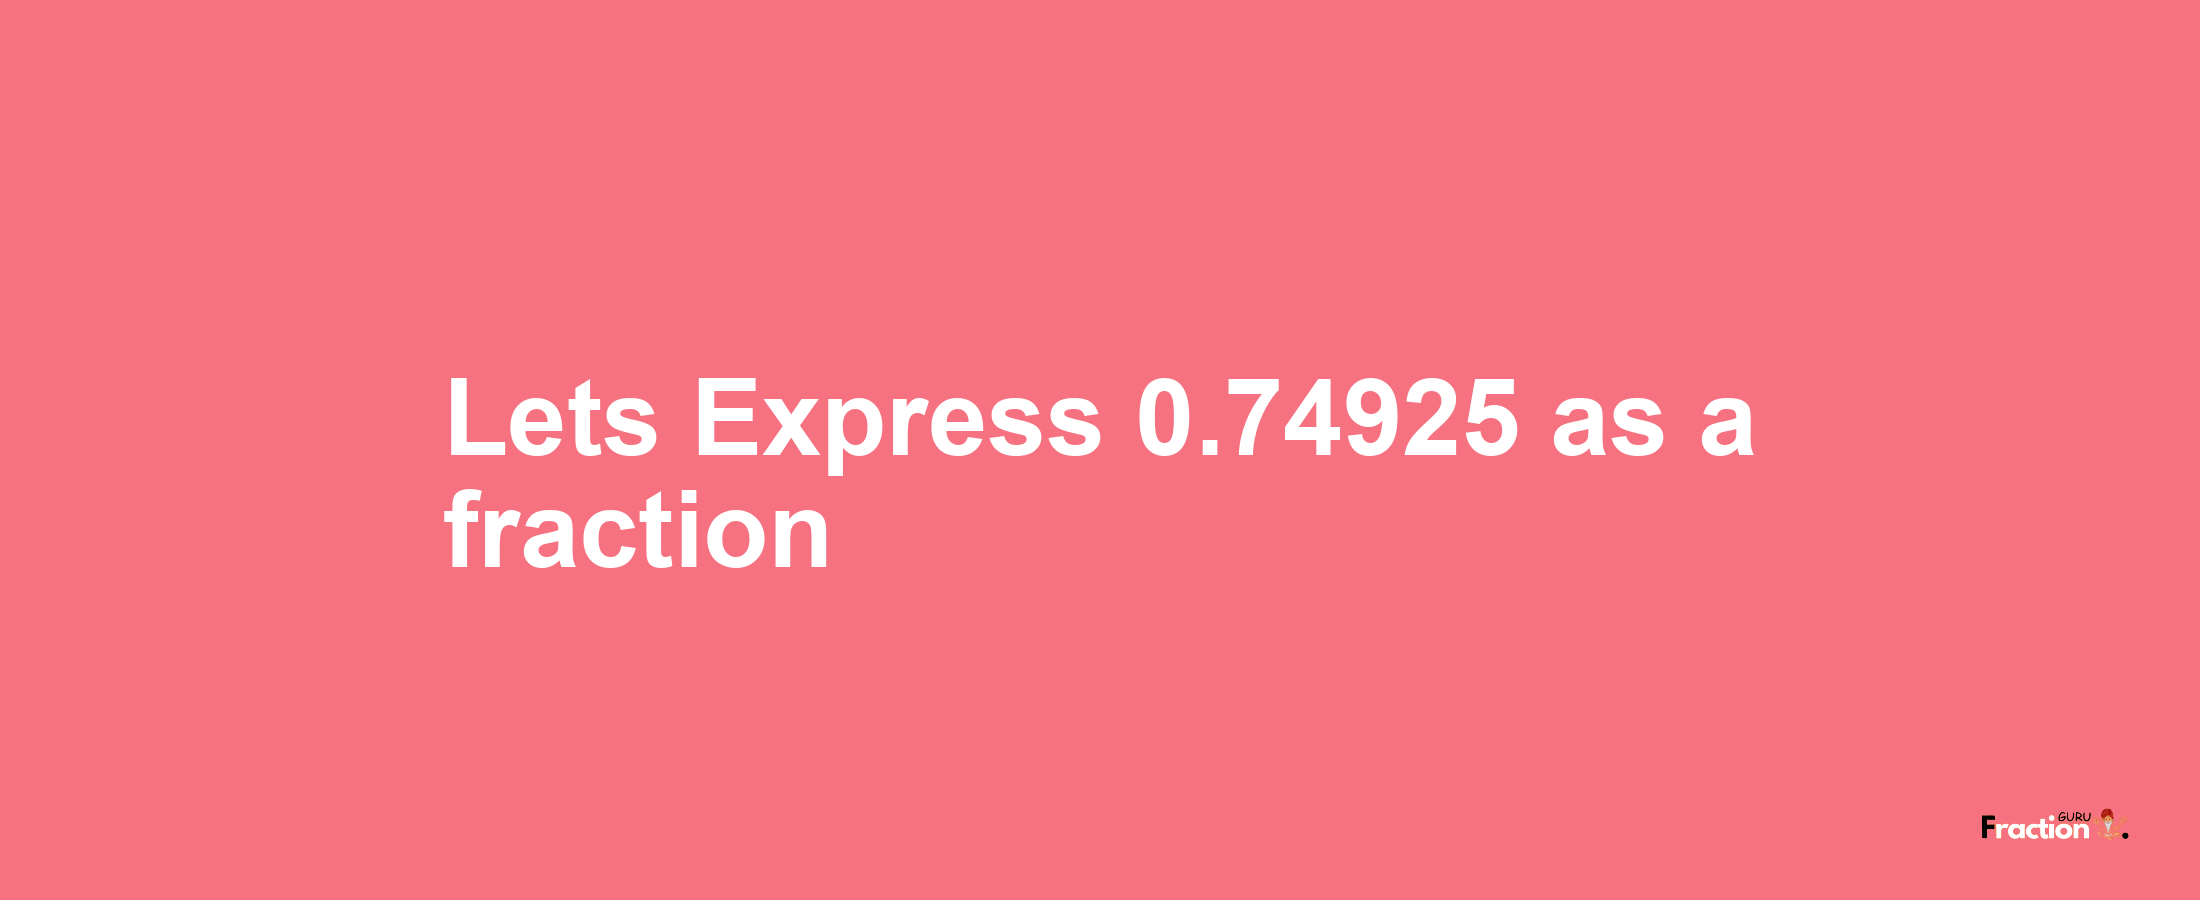 Lets Express 0.74925 as afraction